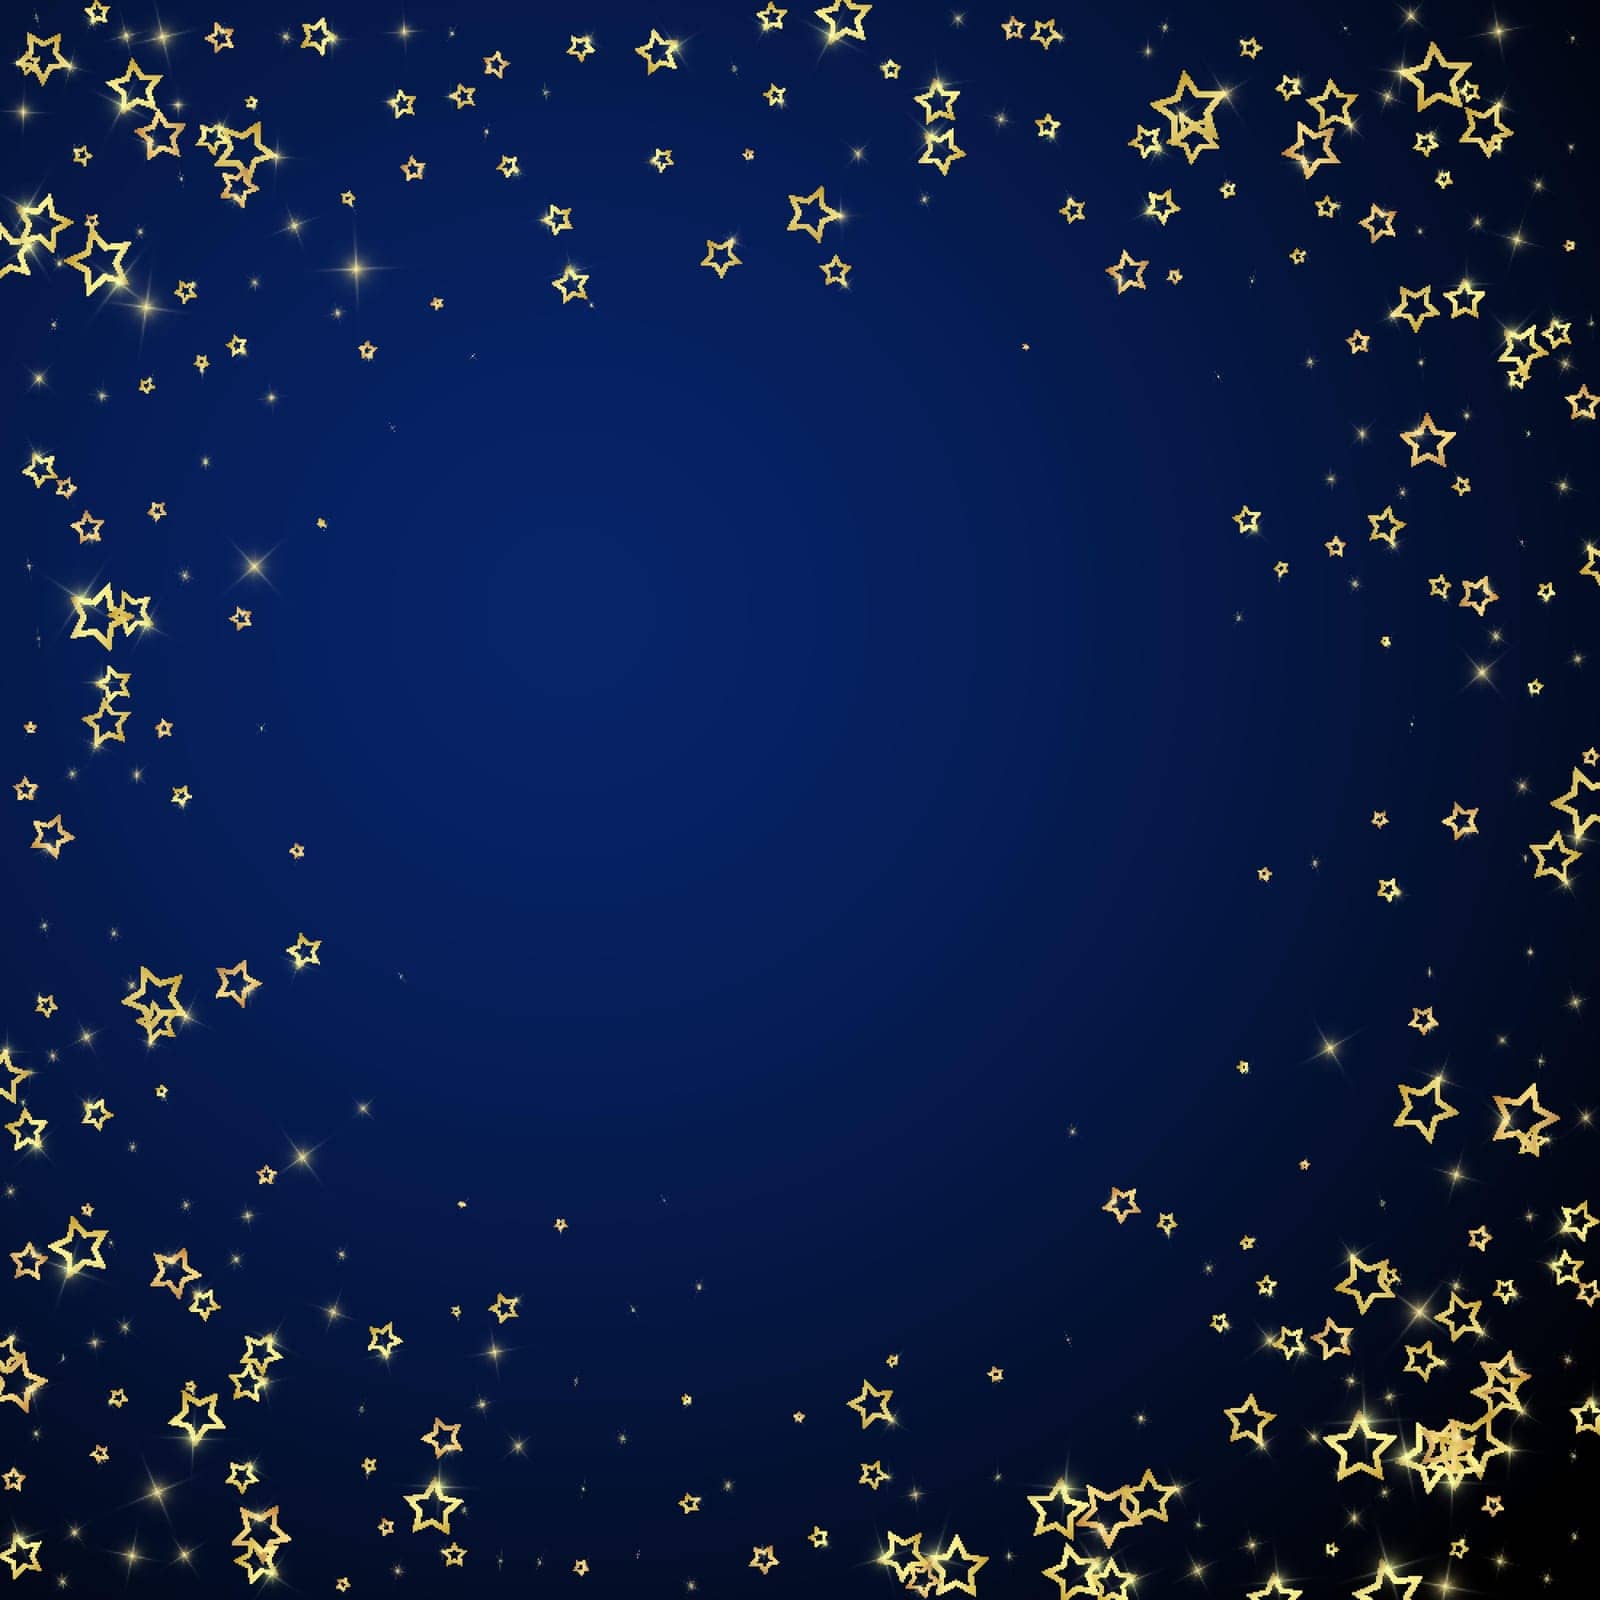 Starry night fairy tale background. Cute sparkling twinkles, christmas spirit in the air. Festive stars vector illustration on dark blue background.